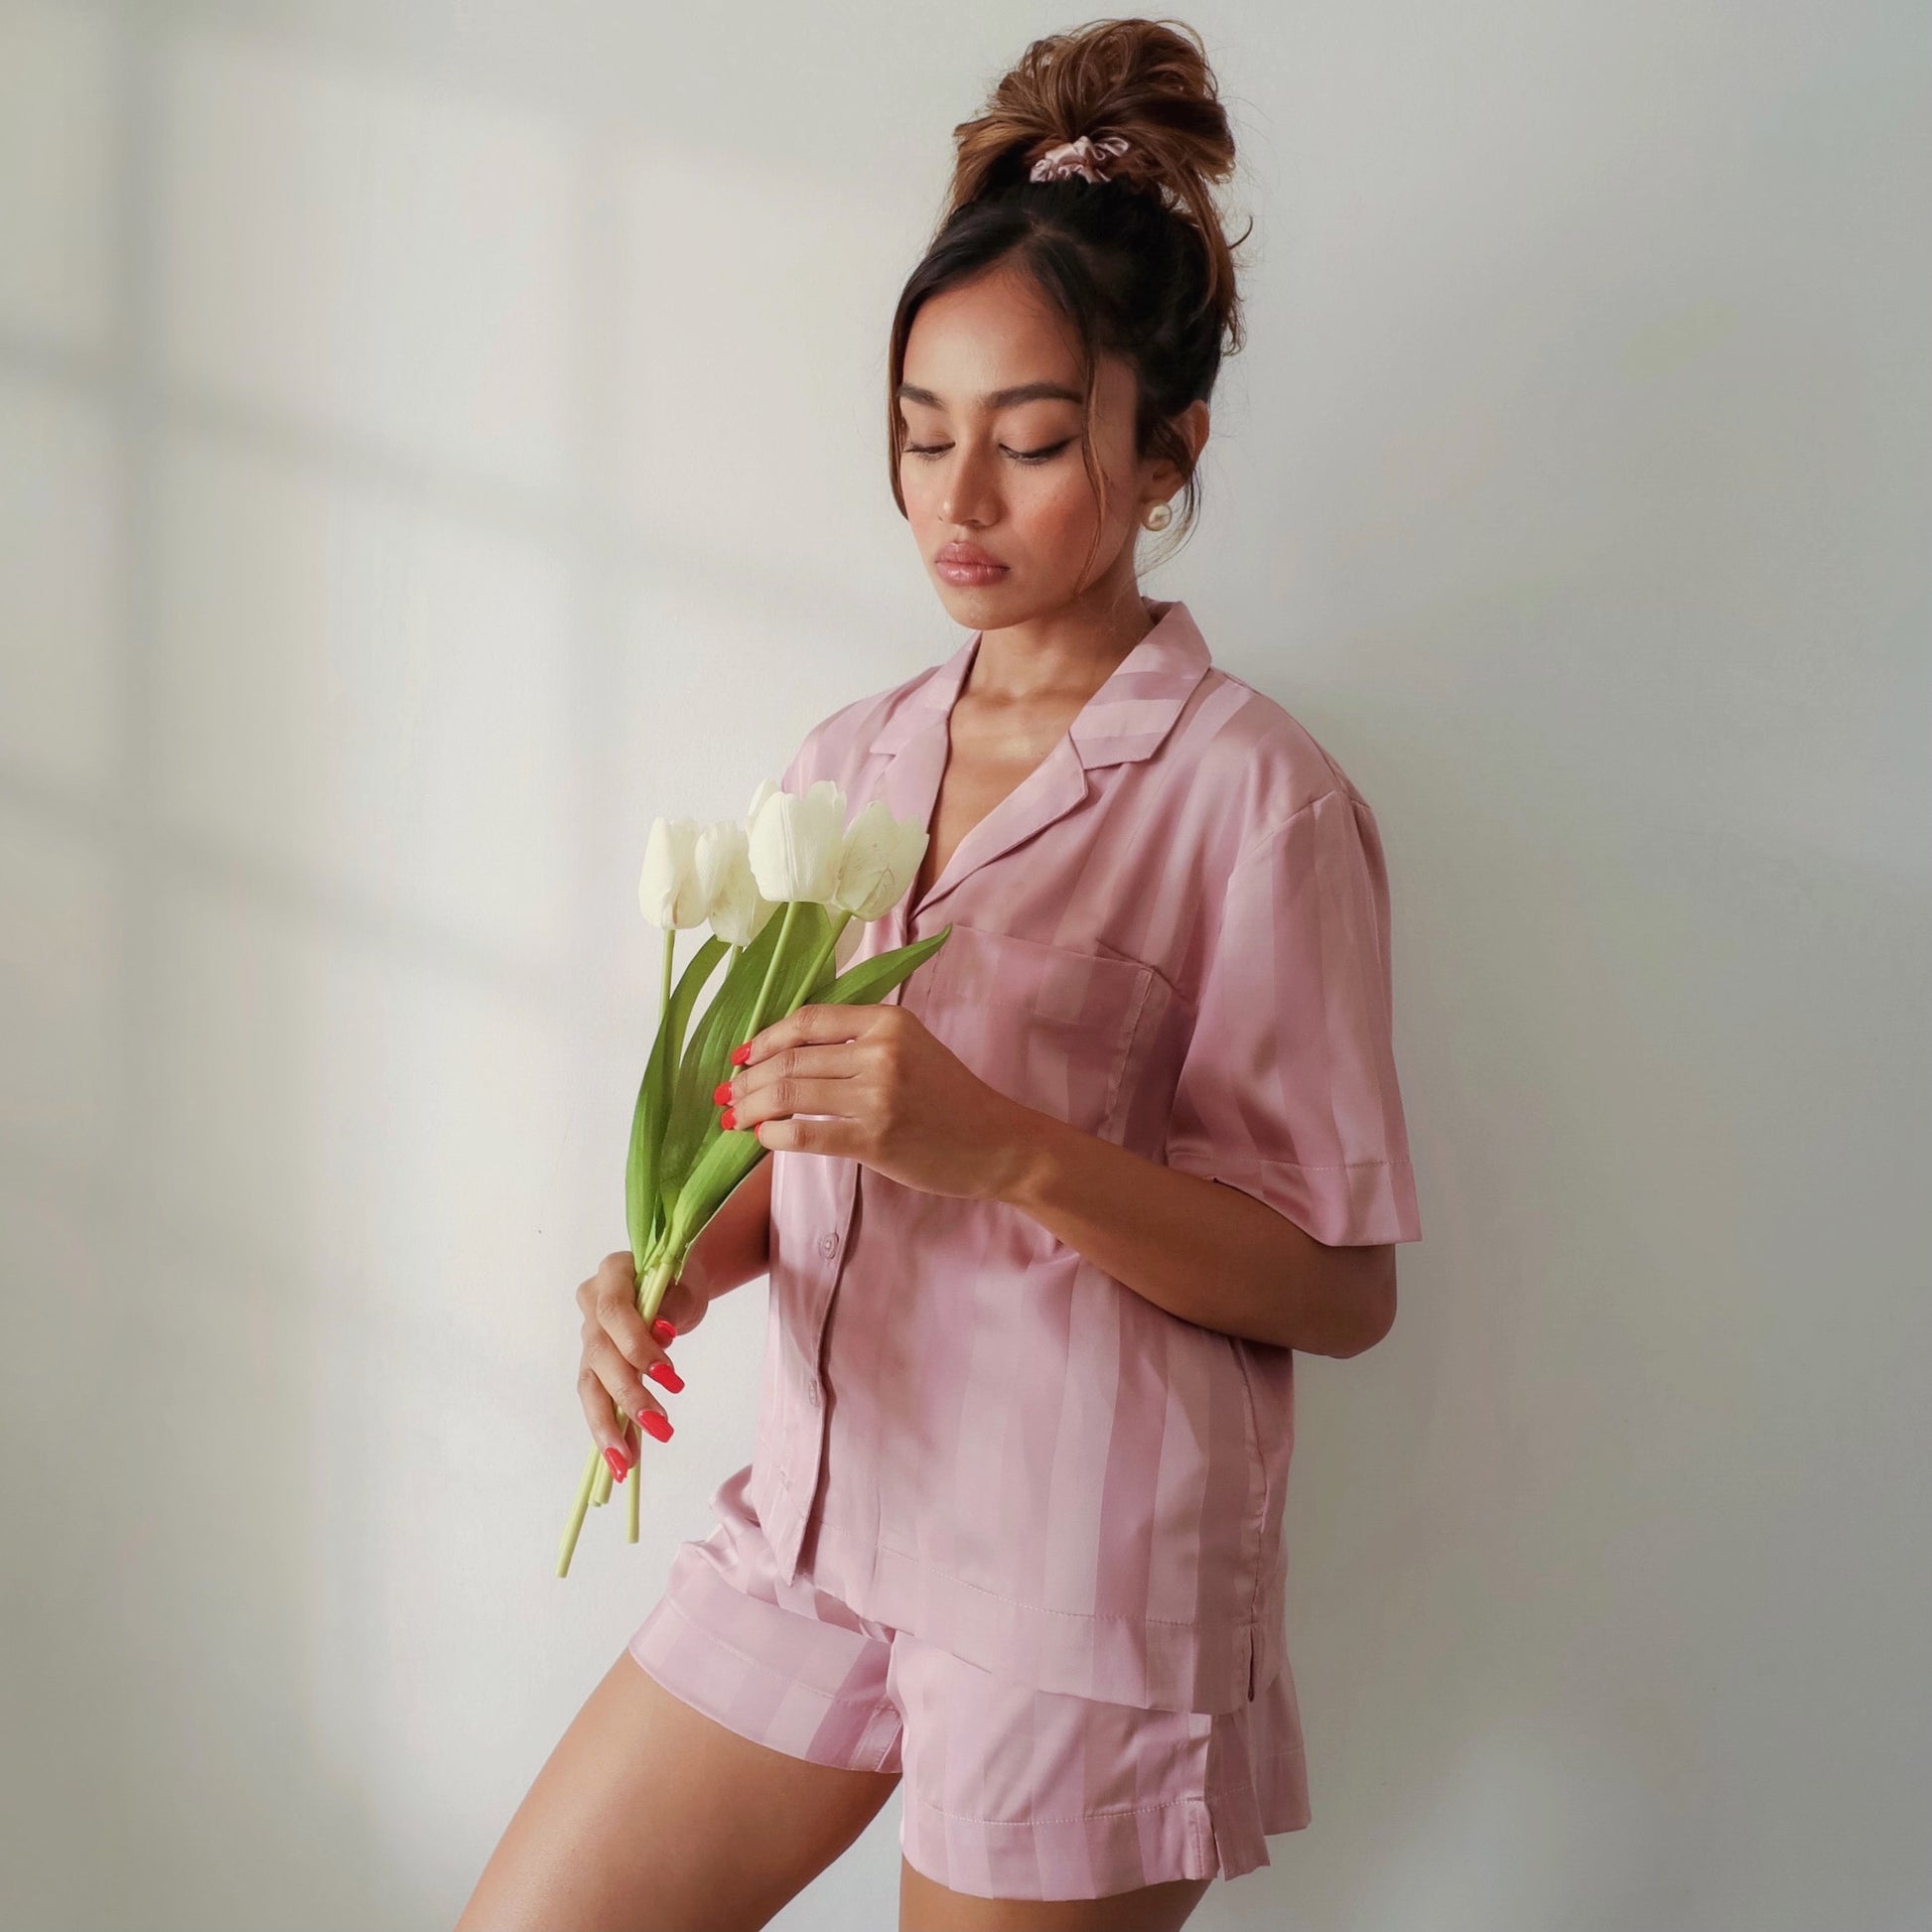 Sadie Silk Pyjamas Set in Rose. Made from 100% pure mulberry silk. Shop now a pair of this pyjama set while looking cute and stylish on a casual day. An essential sleepwear for everyday comfort in your own home.